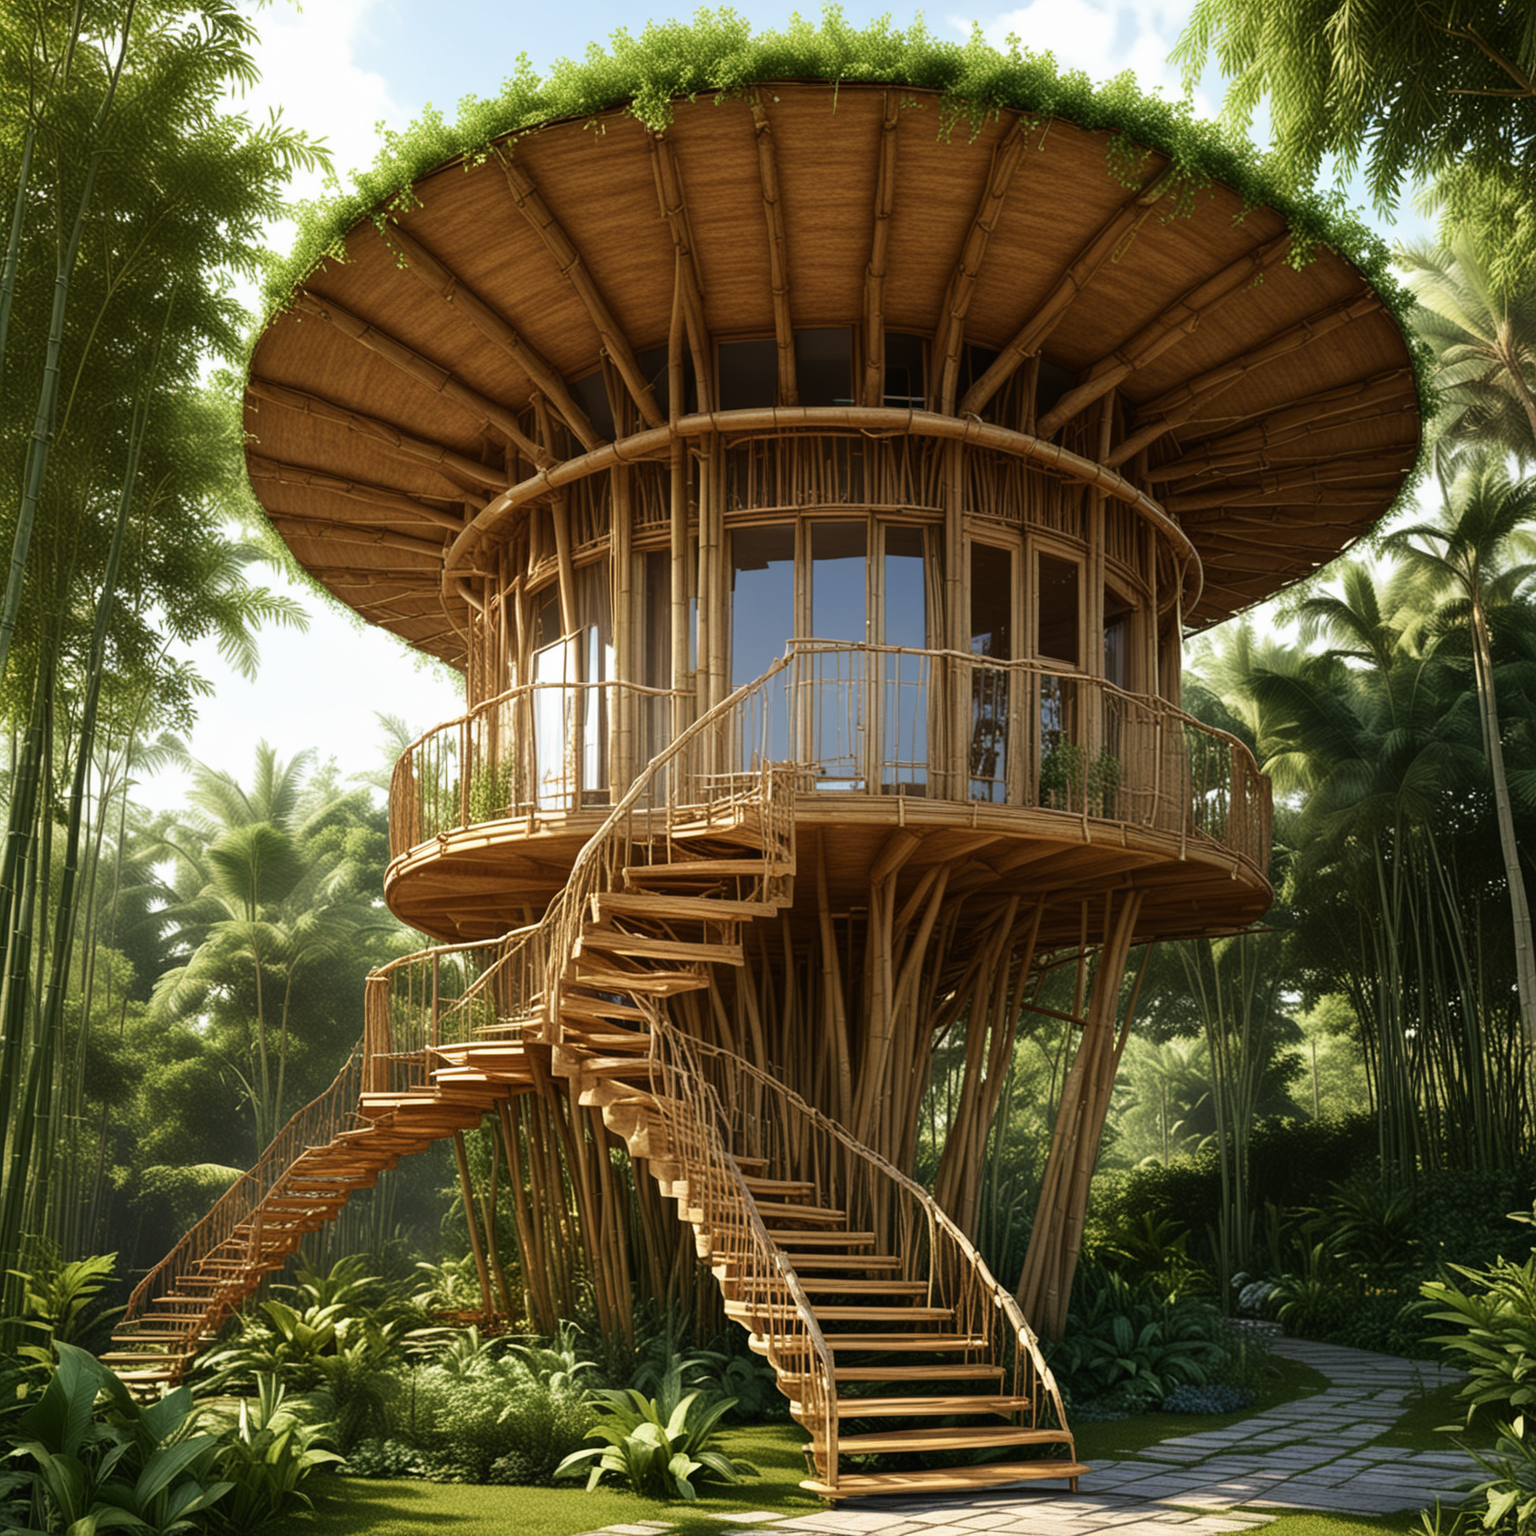 Contemporary Bamboo Villa with Hyperbolic Tower and Organic Design